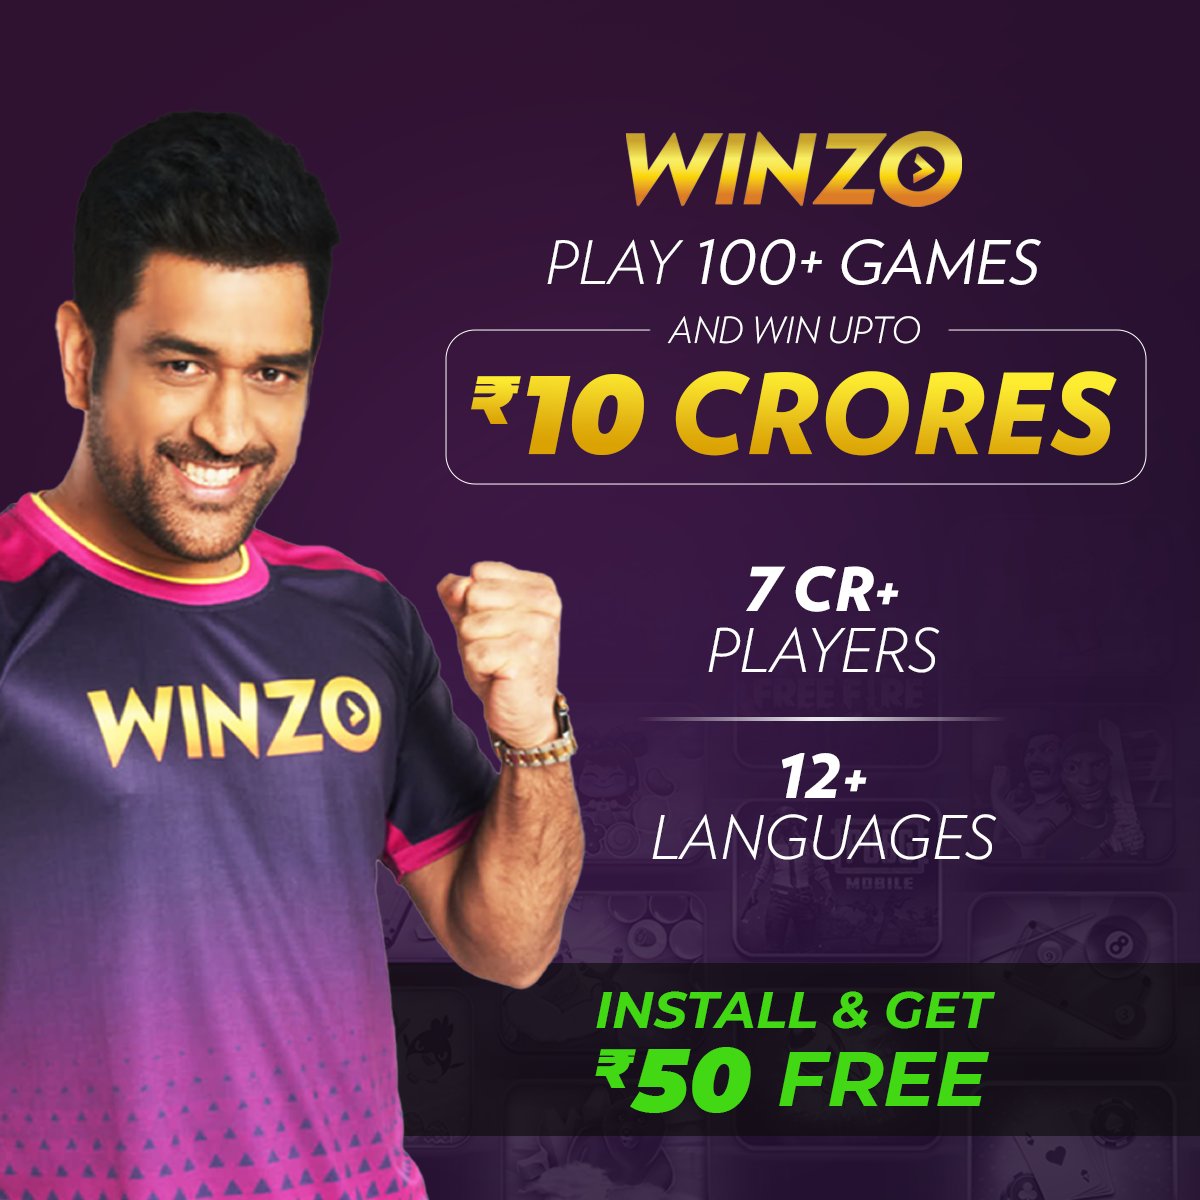 Join me on WinZO and play 70+ games. Bharat ka Apna Game. Download WinZO from this link: winzo.onelink.me/gu8K/b5693c88 to claim your bumper cash bonus! Earn up to Rs. 550 per referral! Get Rs. 50 on Download Free